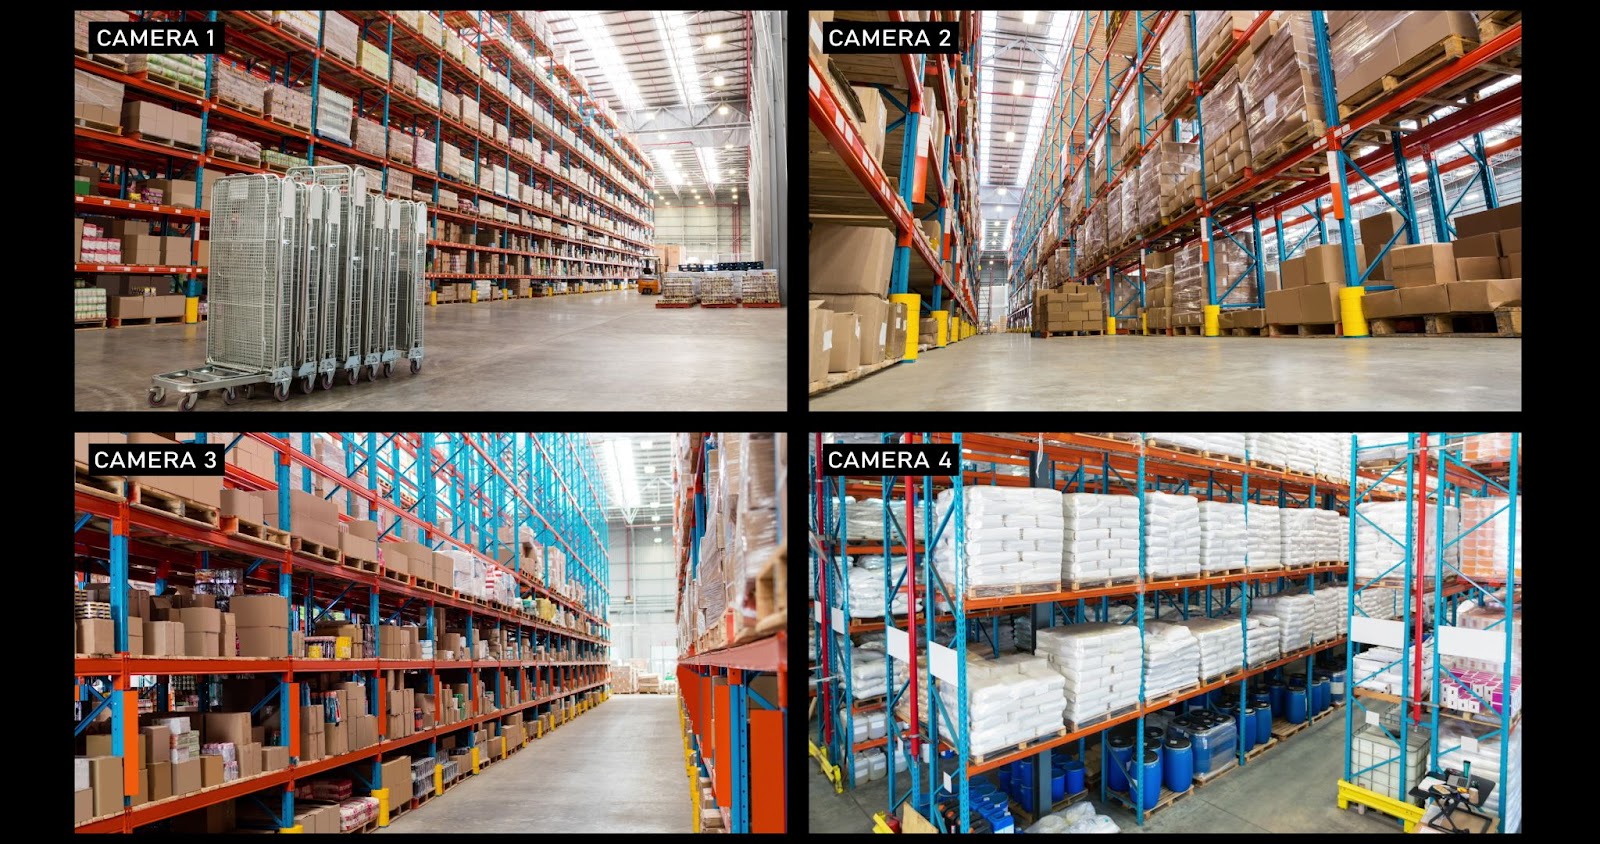 Four-grid surveillance camera display of various warehouse sections for security monitoring.